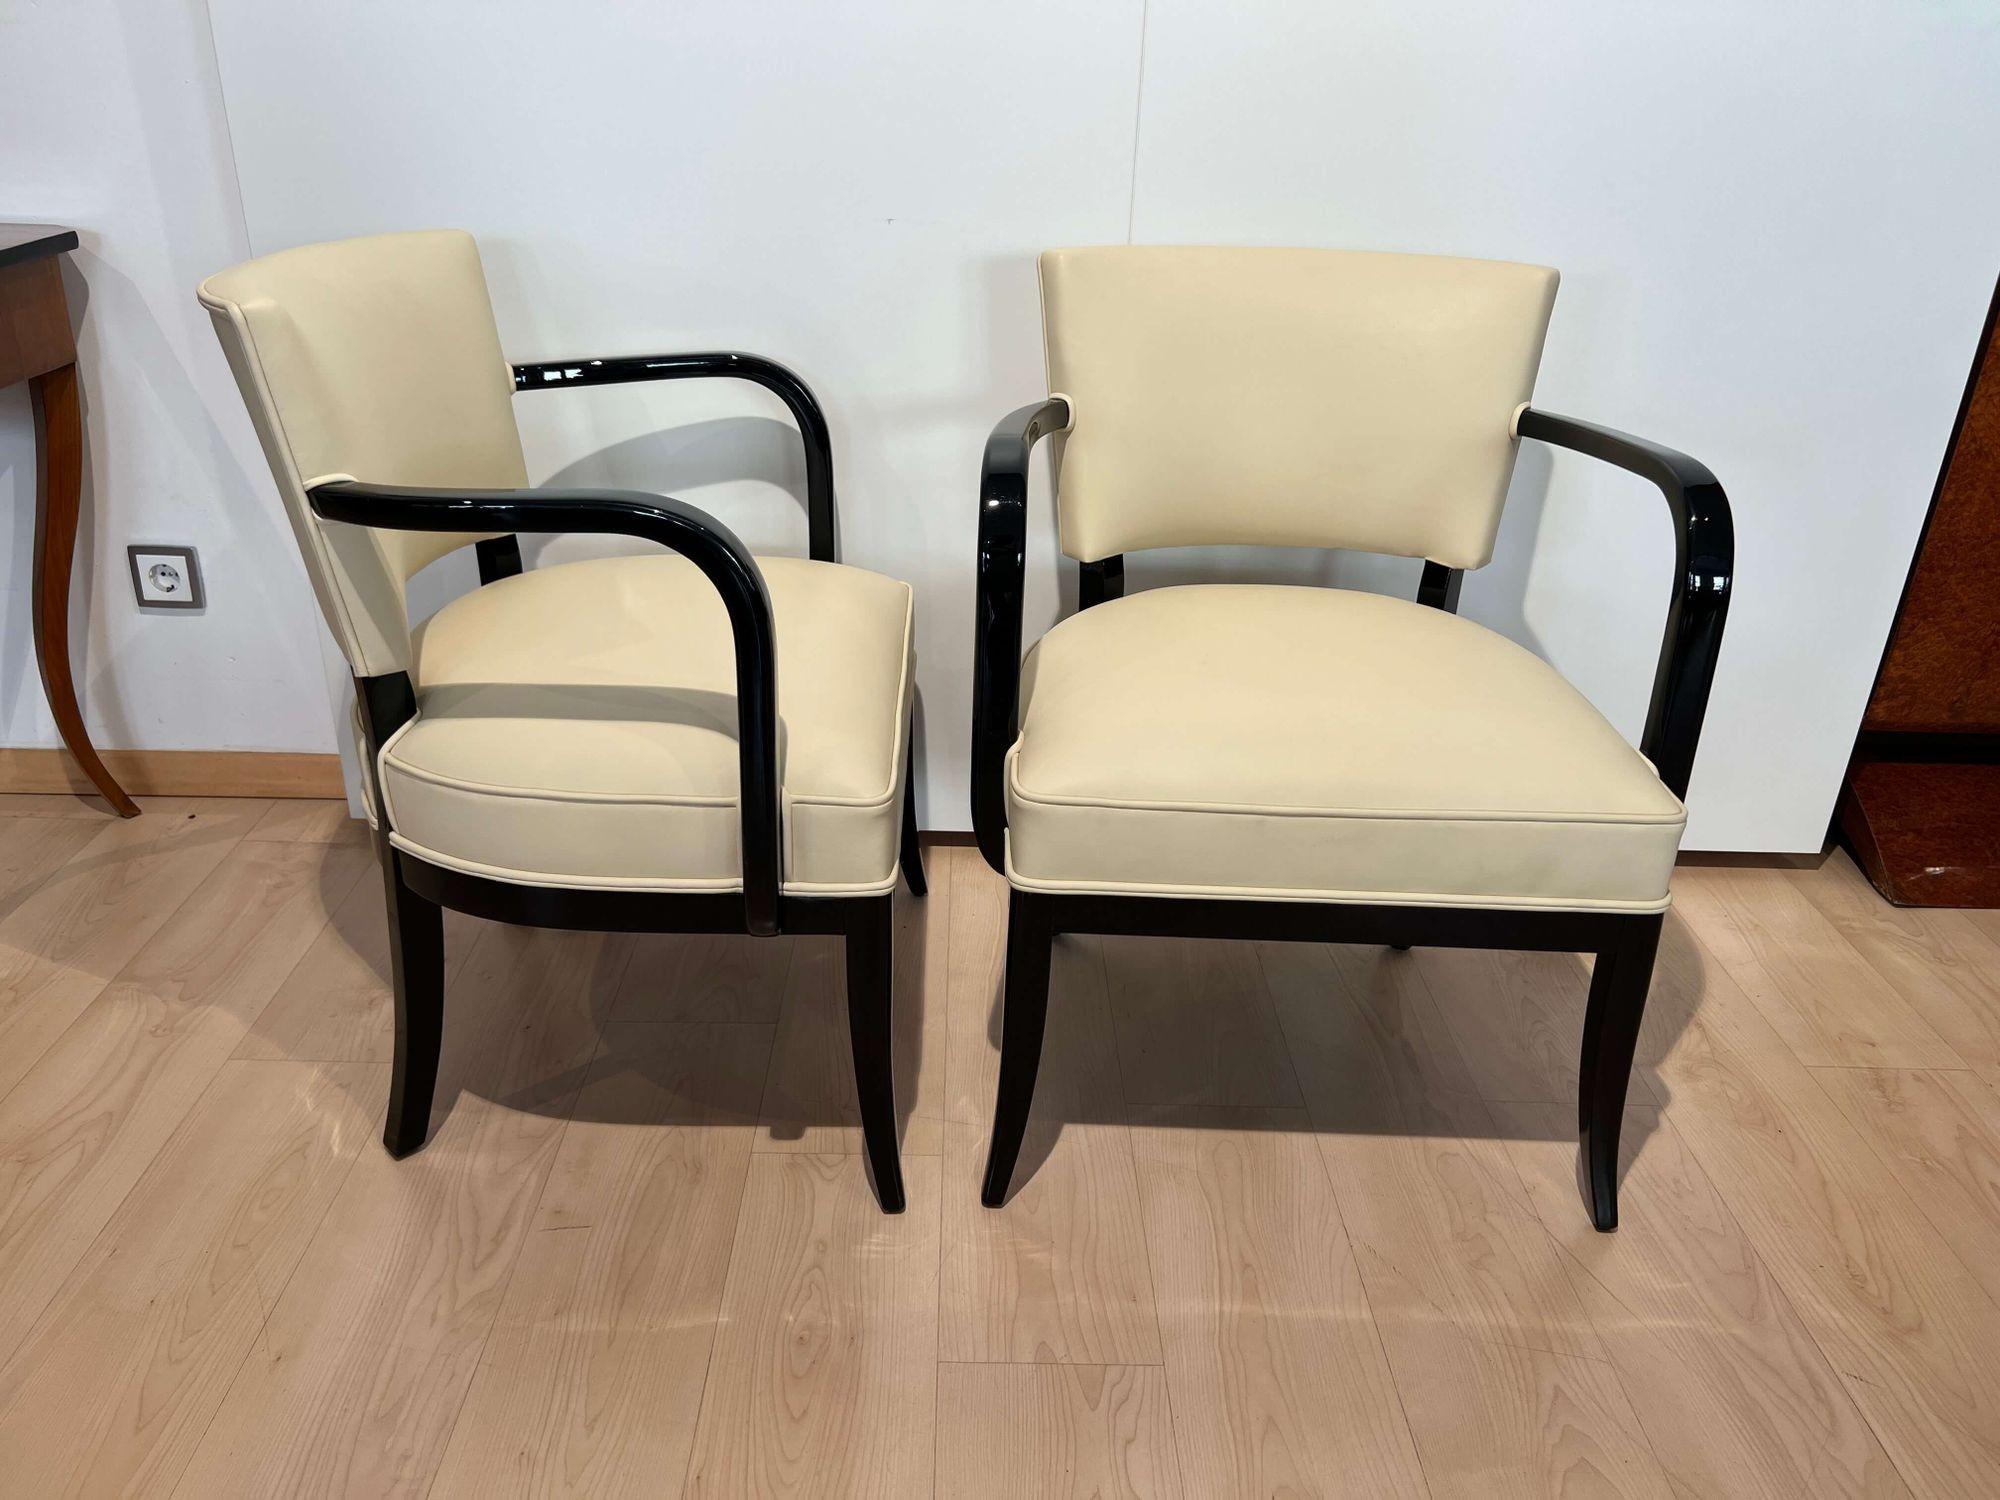 Pair of Art Deco Armchairs, Black Lacquer, Creme Leather, France, 1930s In Good Condition For Sale In Regensburg, DE